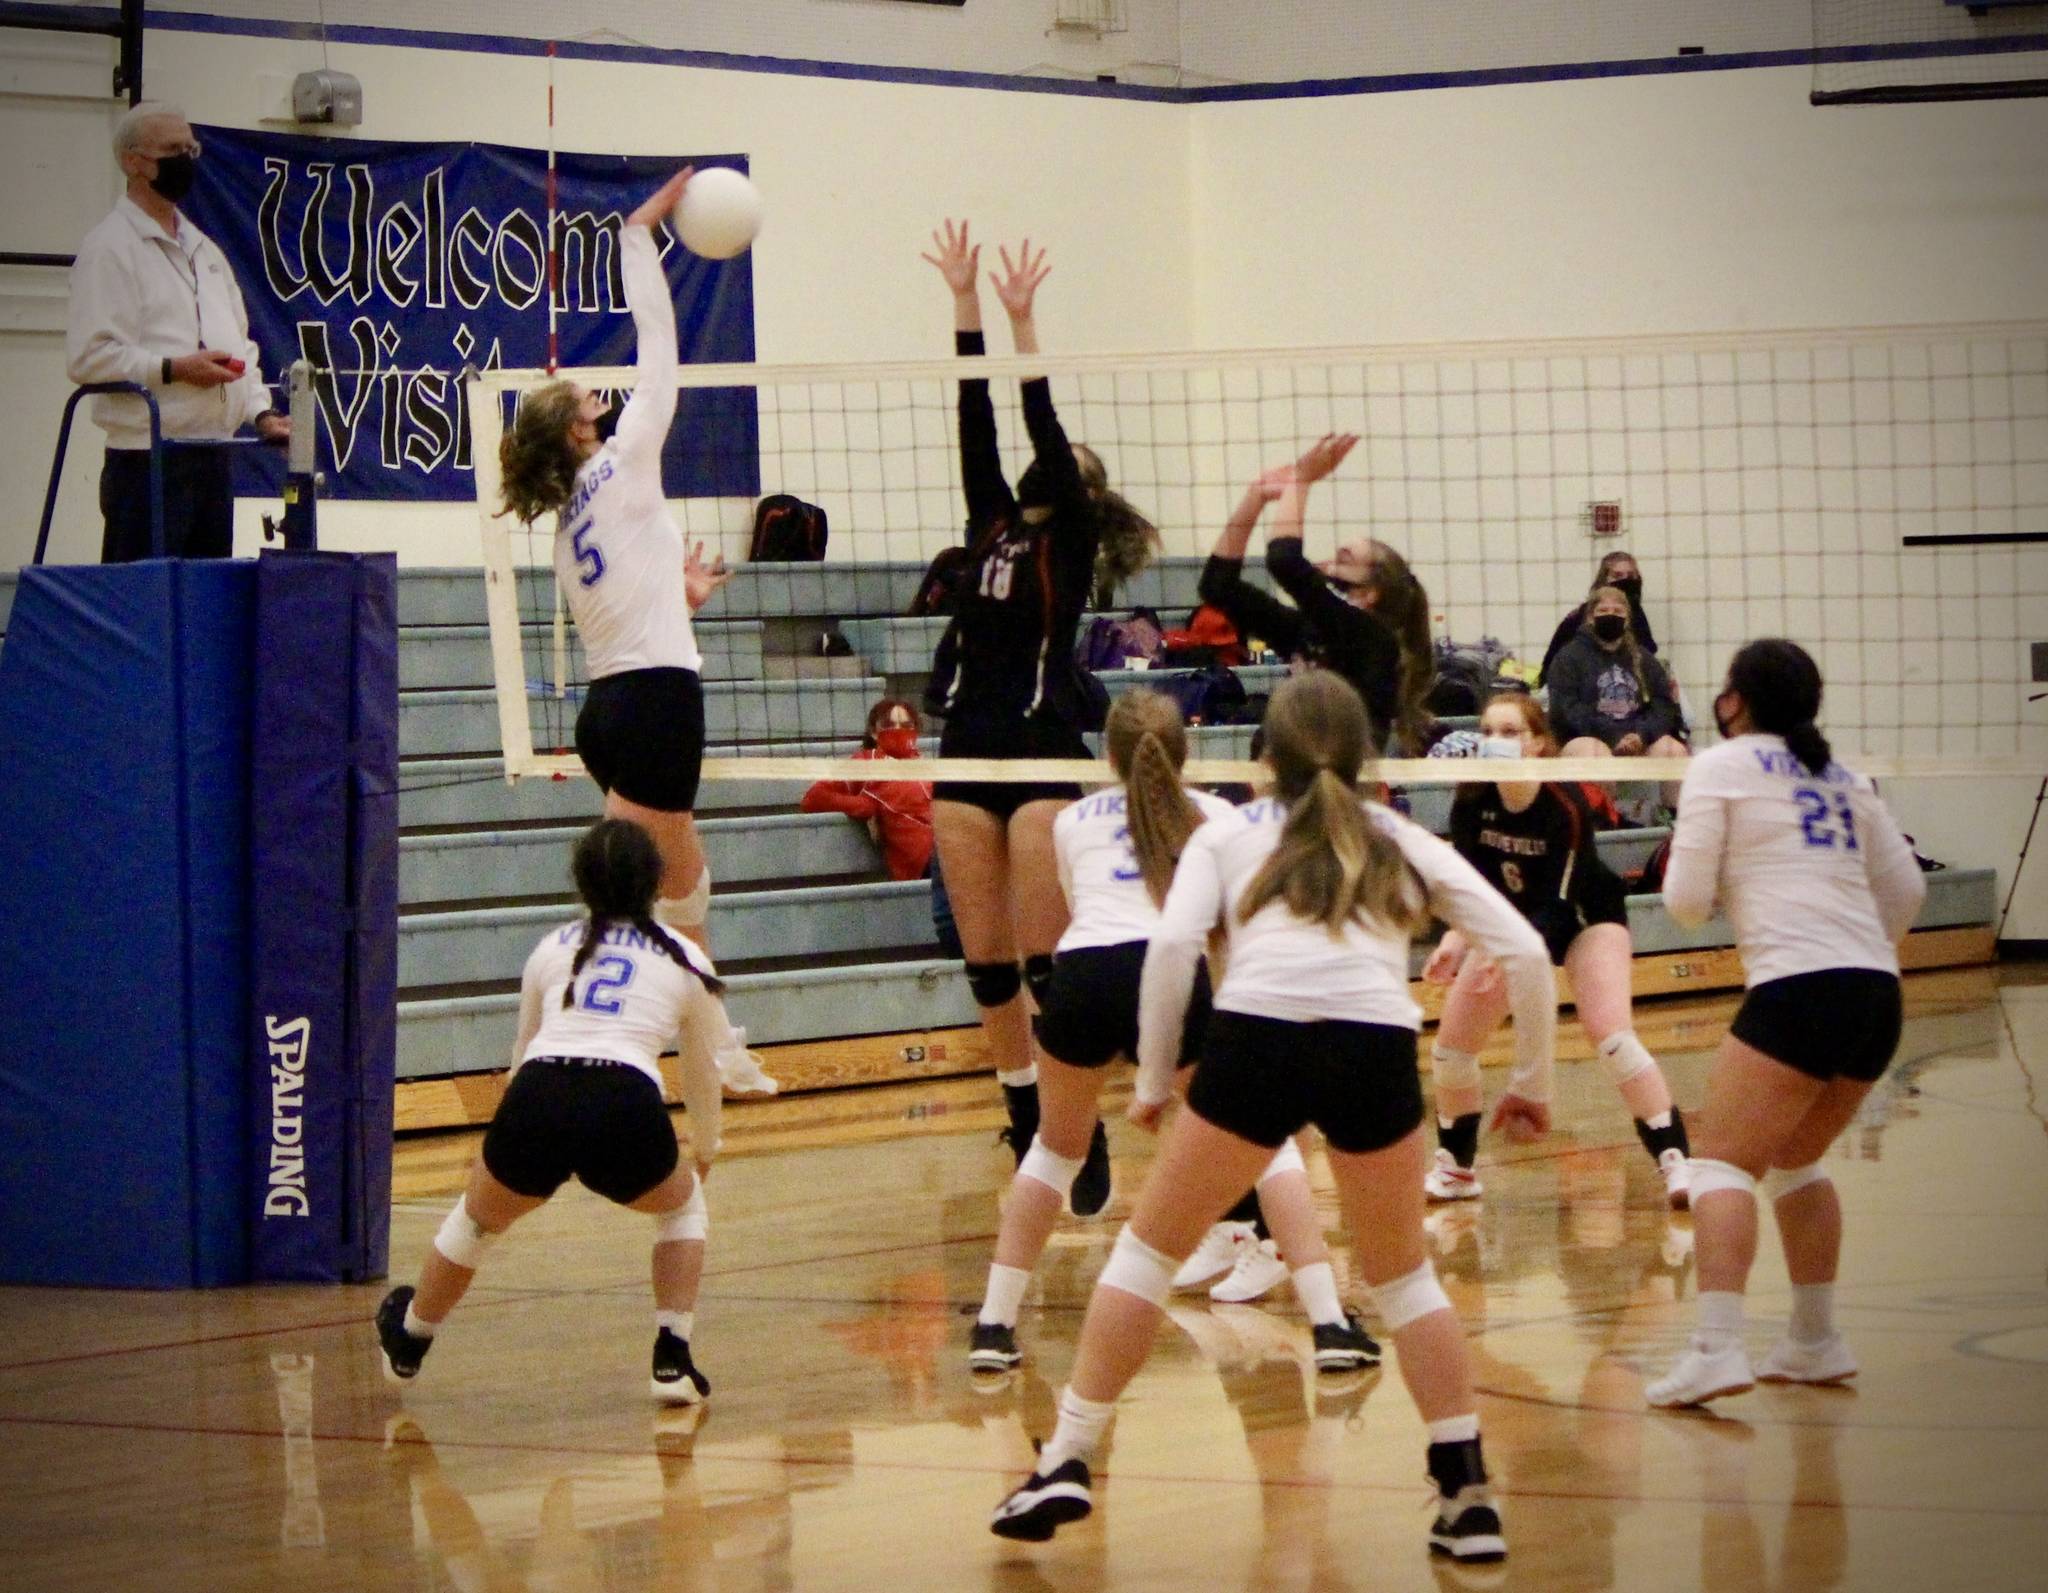 Corey Wiscomb/contributed photo
The Lady Vikings cover the net while Bethany Carter smacks the ball down for a kill against the Wolves.